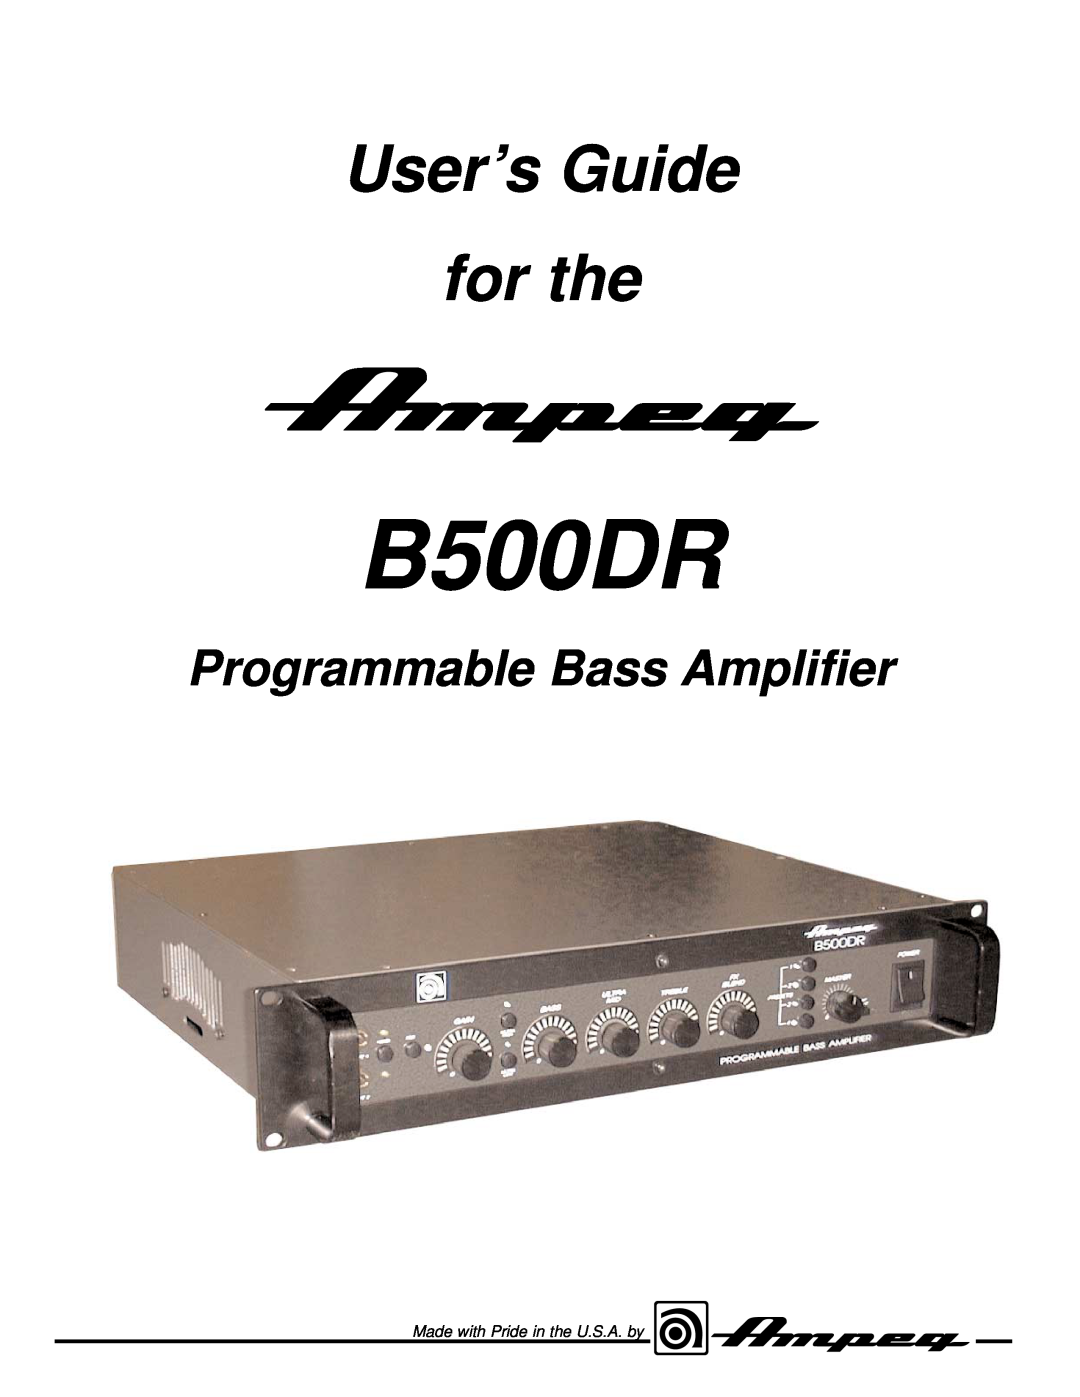 Ampeg B500DR manual User’s Guide for the, Programmable Bass Amplifier, Made with Pride in the U.S.A. by 